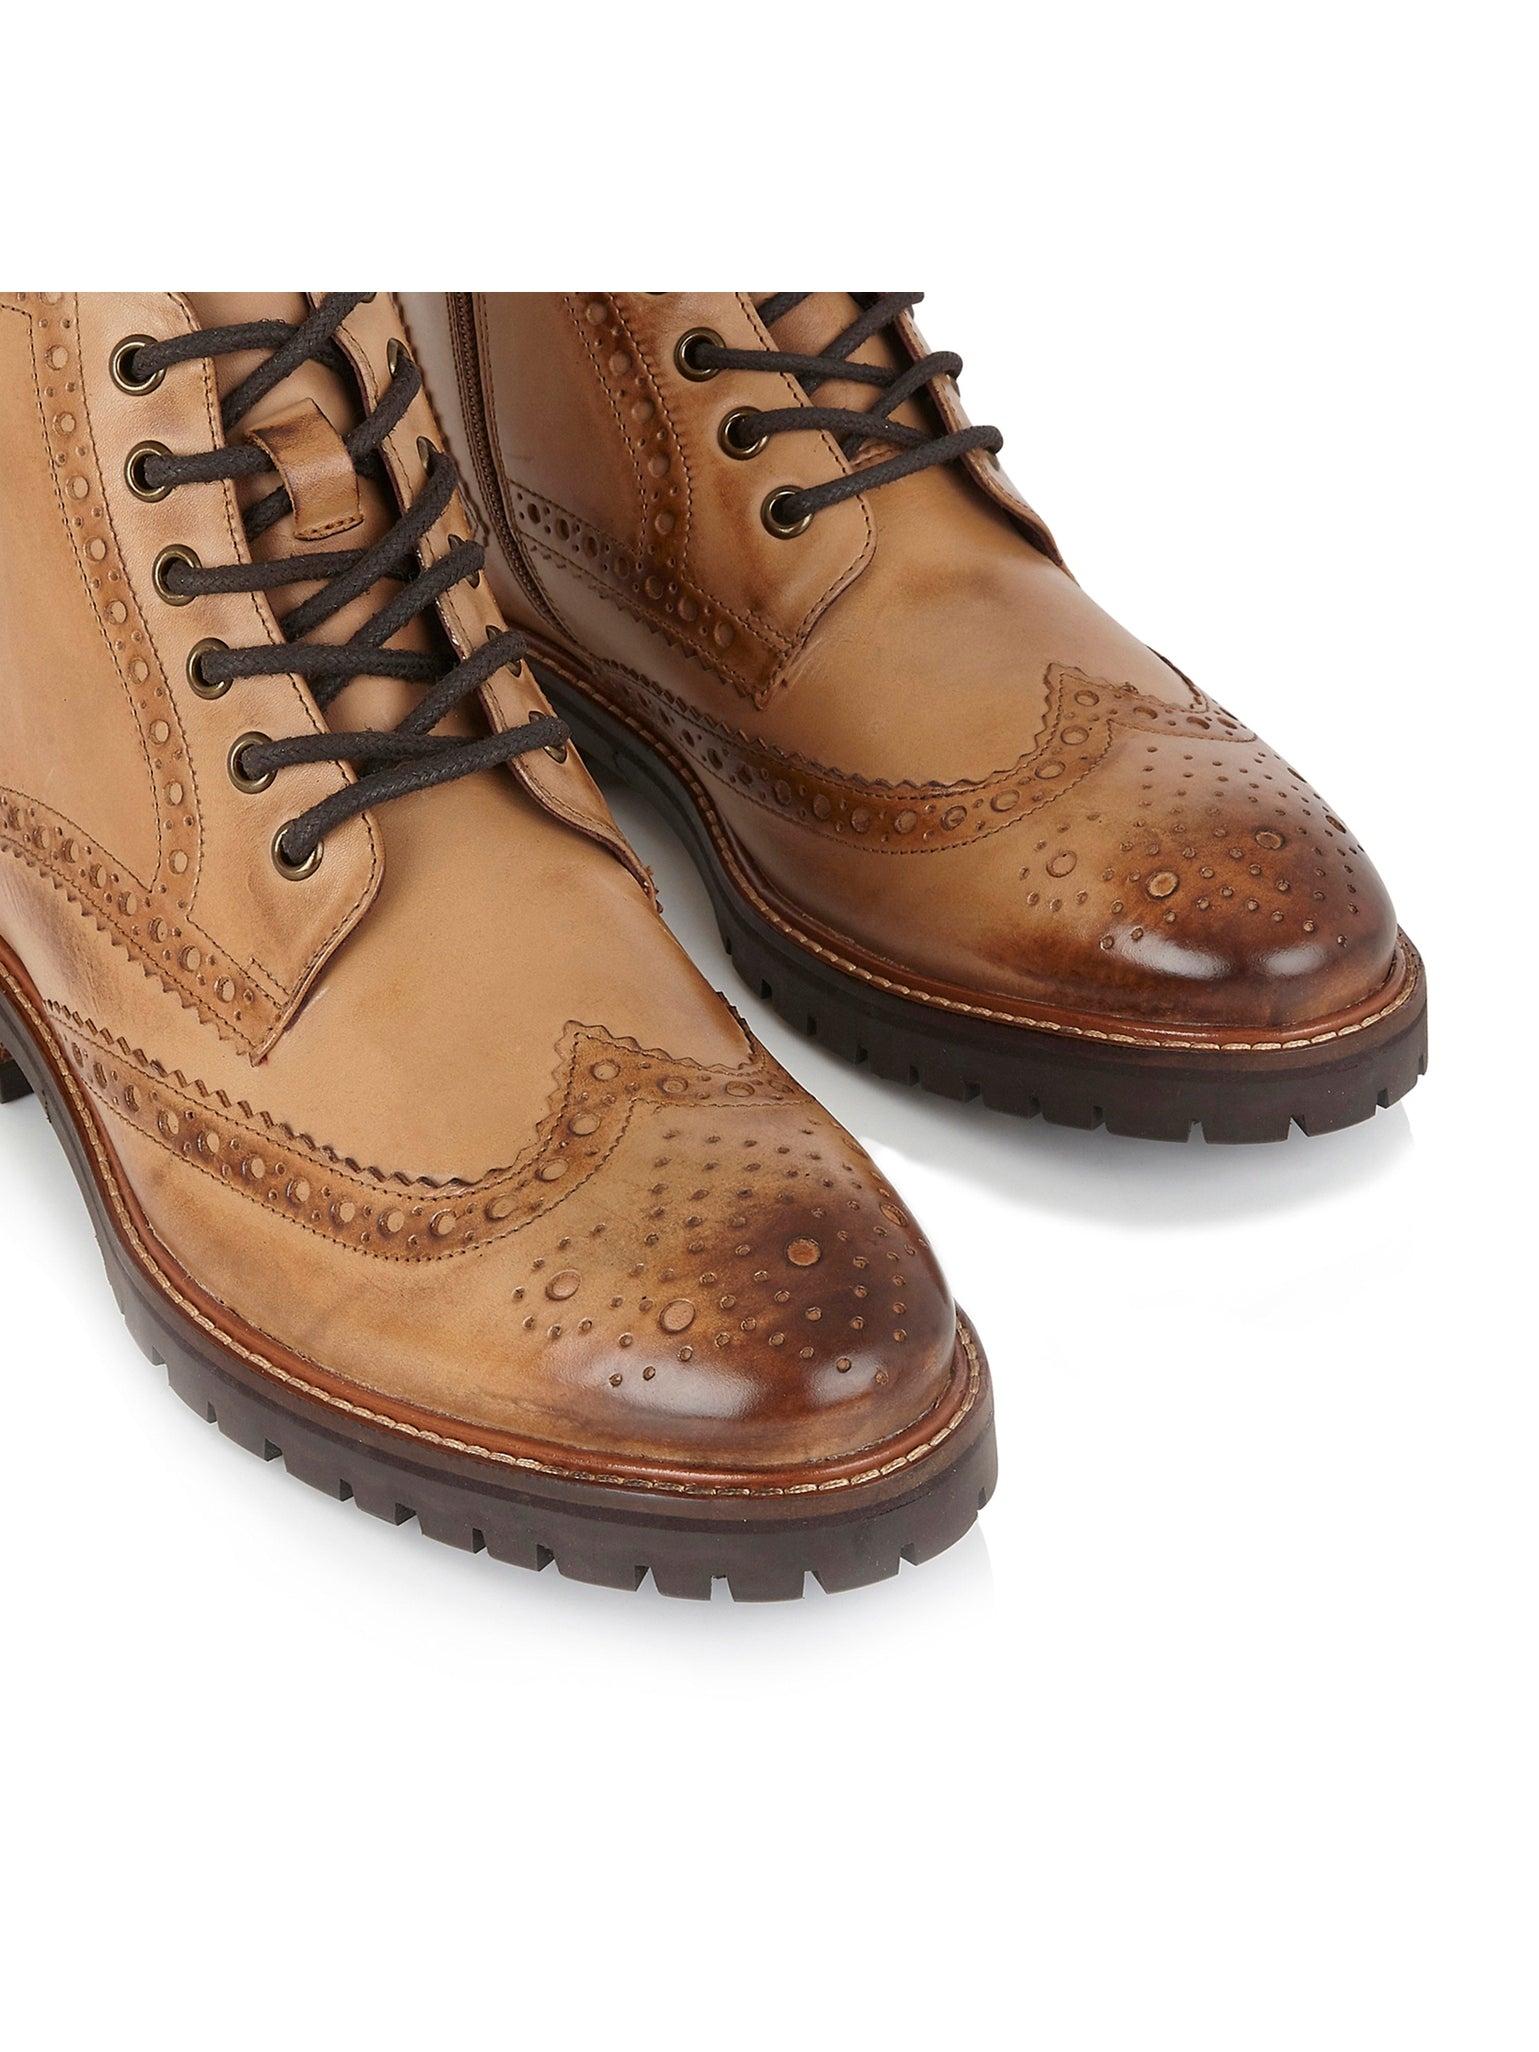 LACE UP DERBY BROGUE BOOTS IN TAN